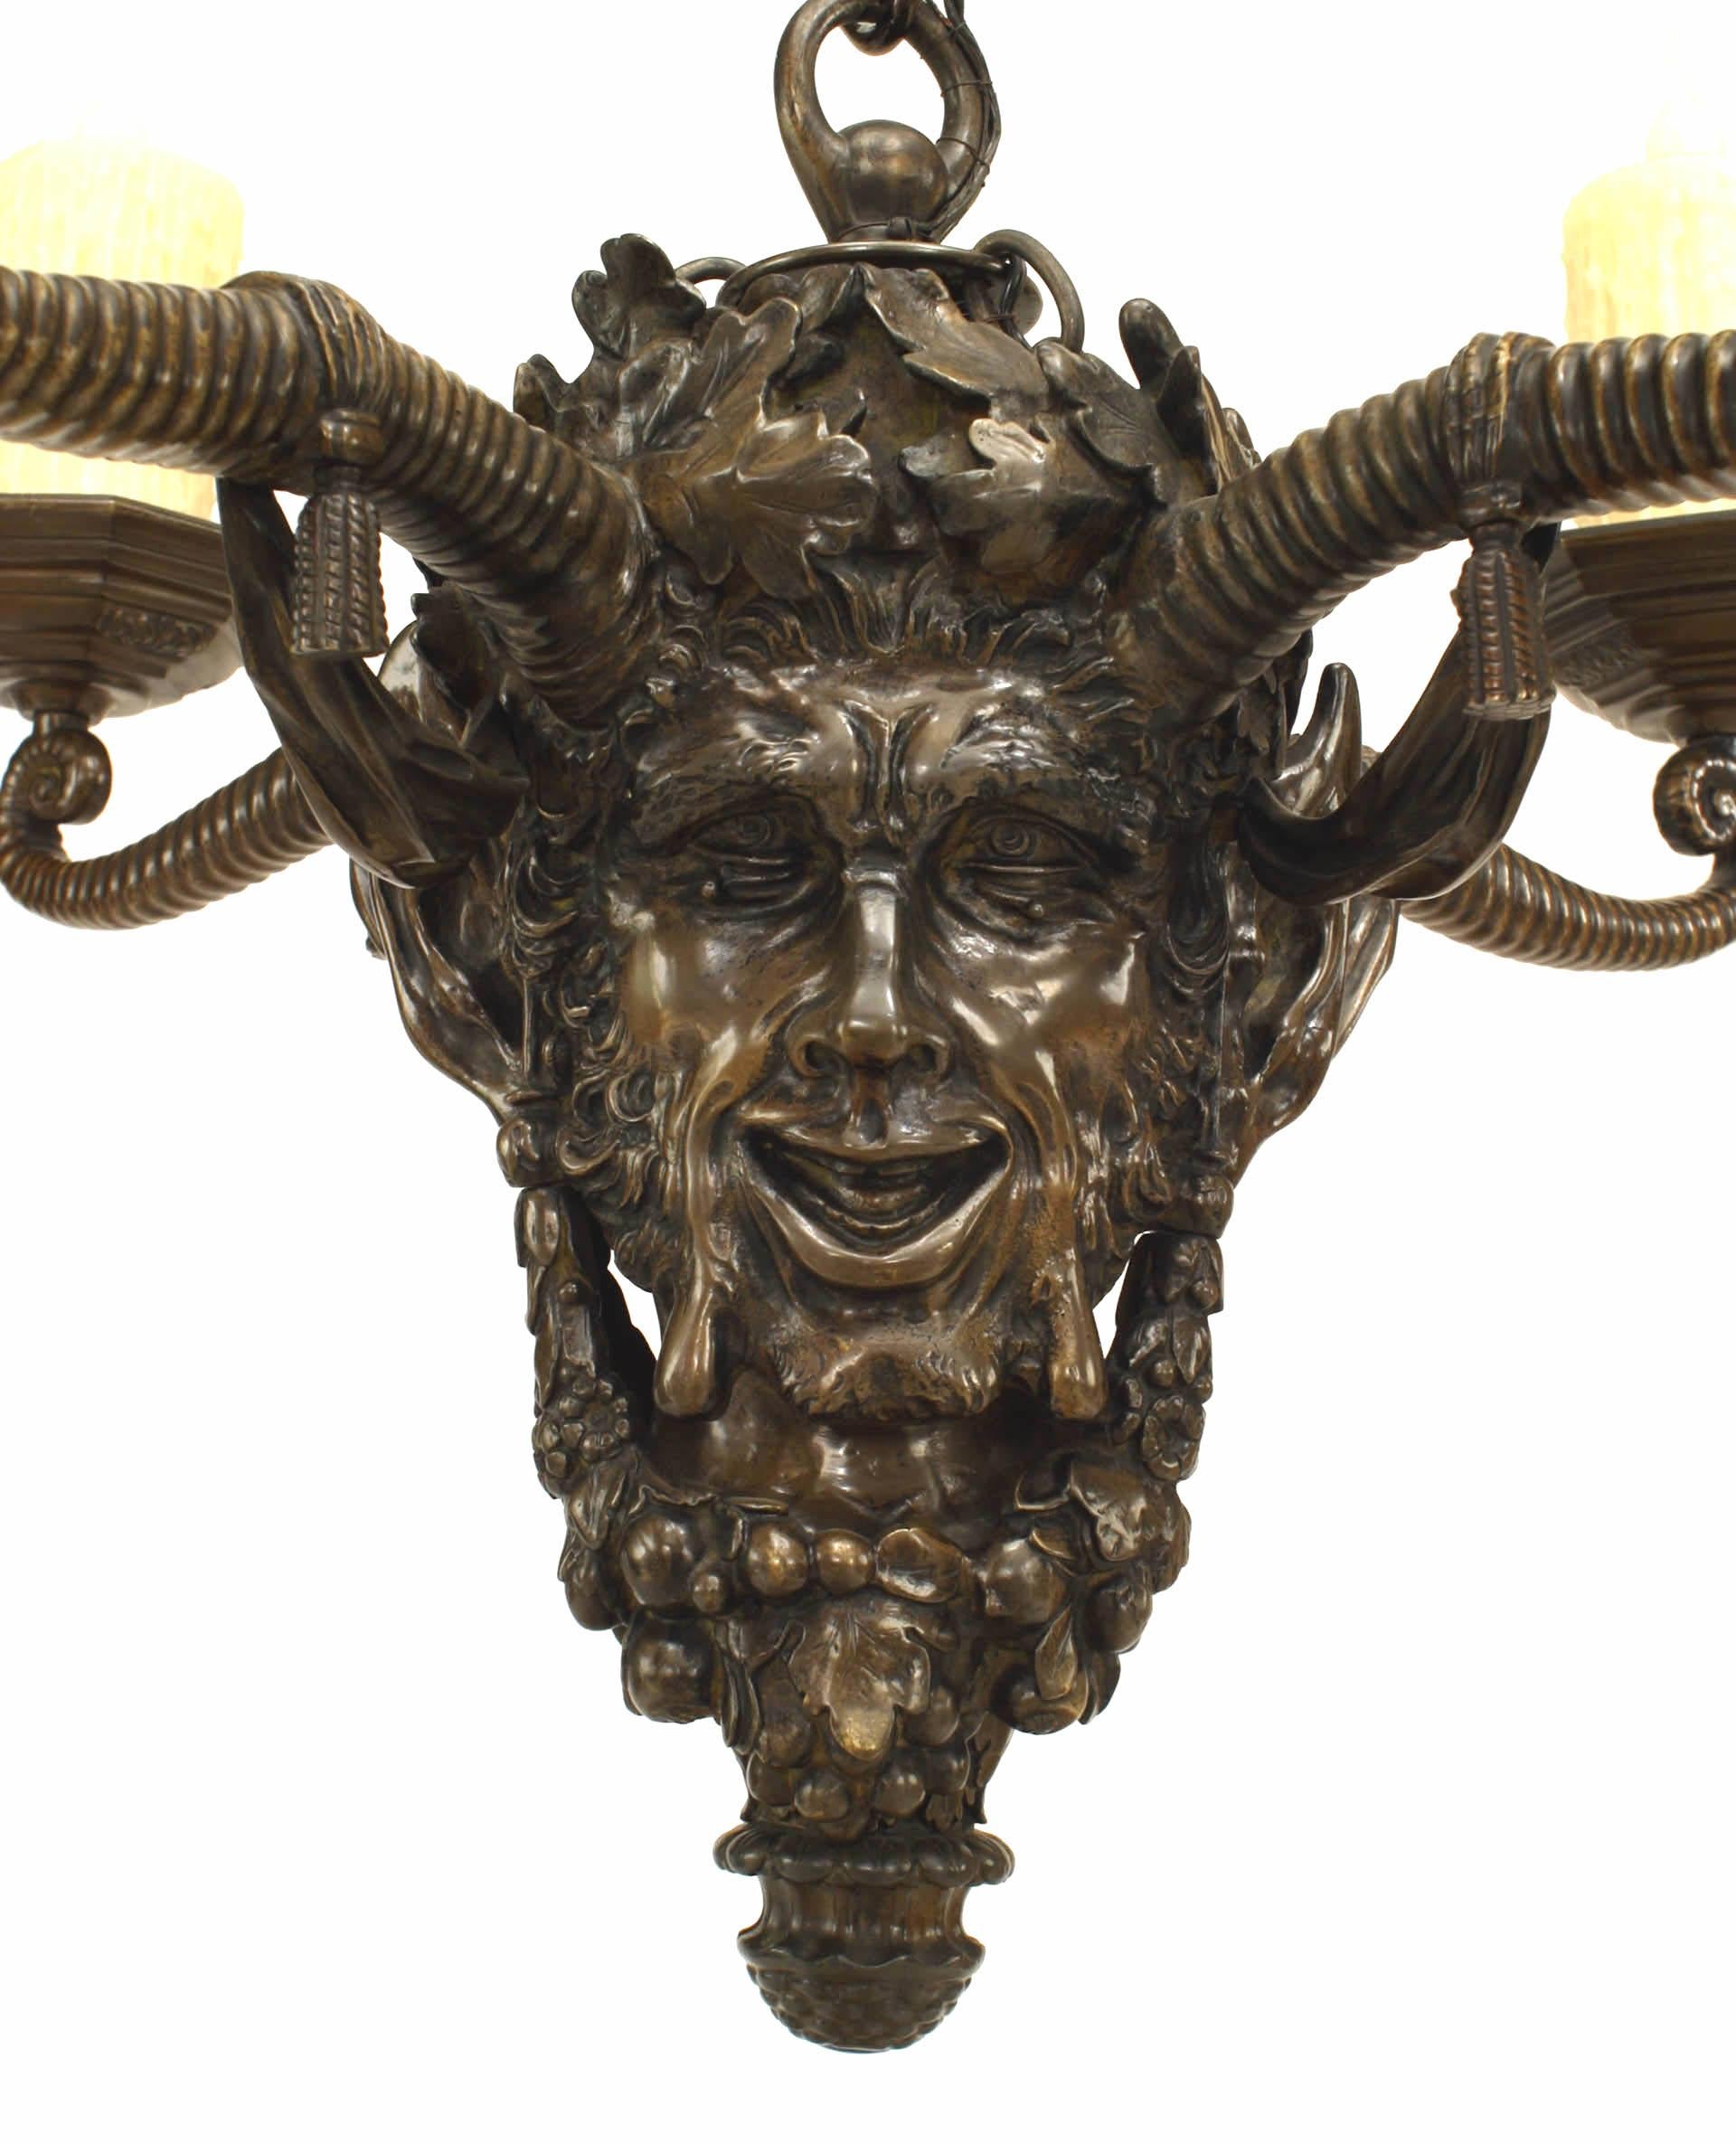 English Victorian-style (late 19th Century) bronze chandelier of mythological head form festooned with oak leaf crown and garlands with 4 fanciful horn arms. (23